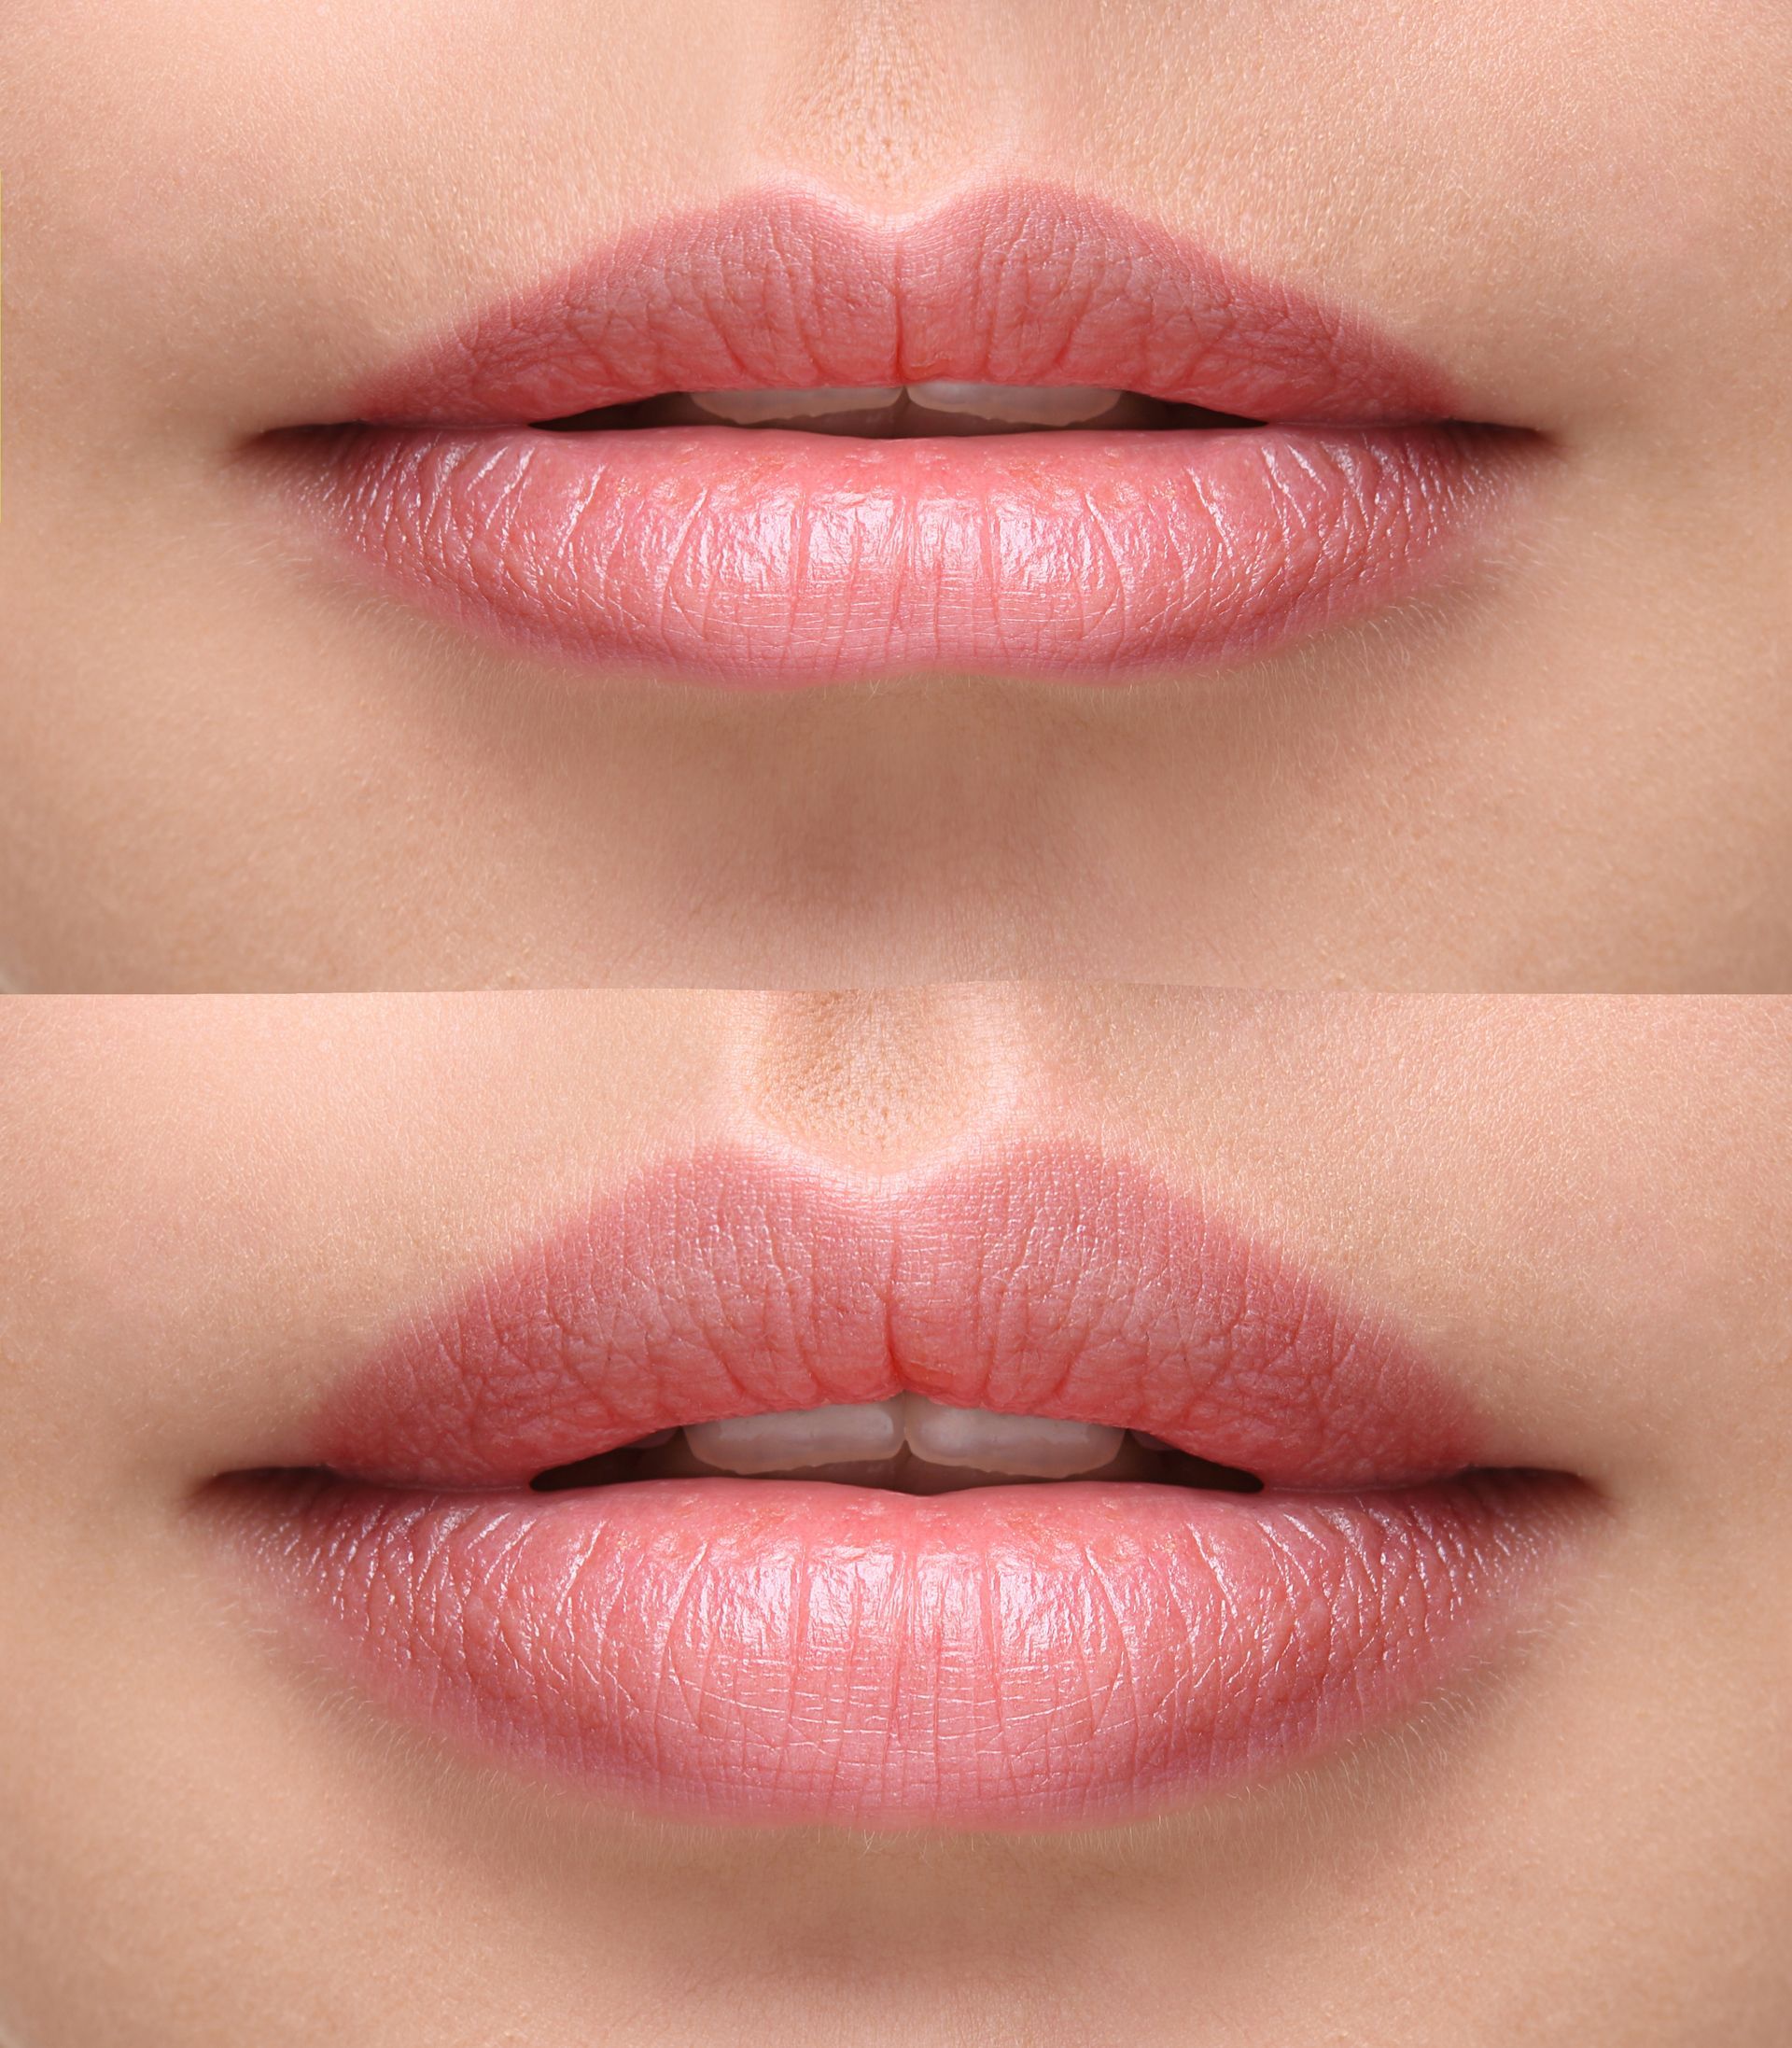 lips before and after fillers